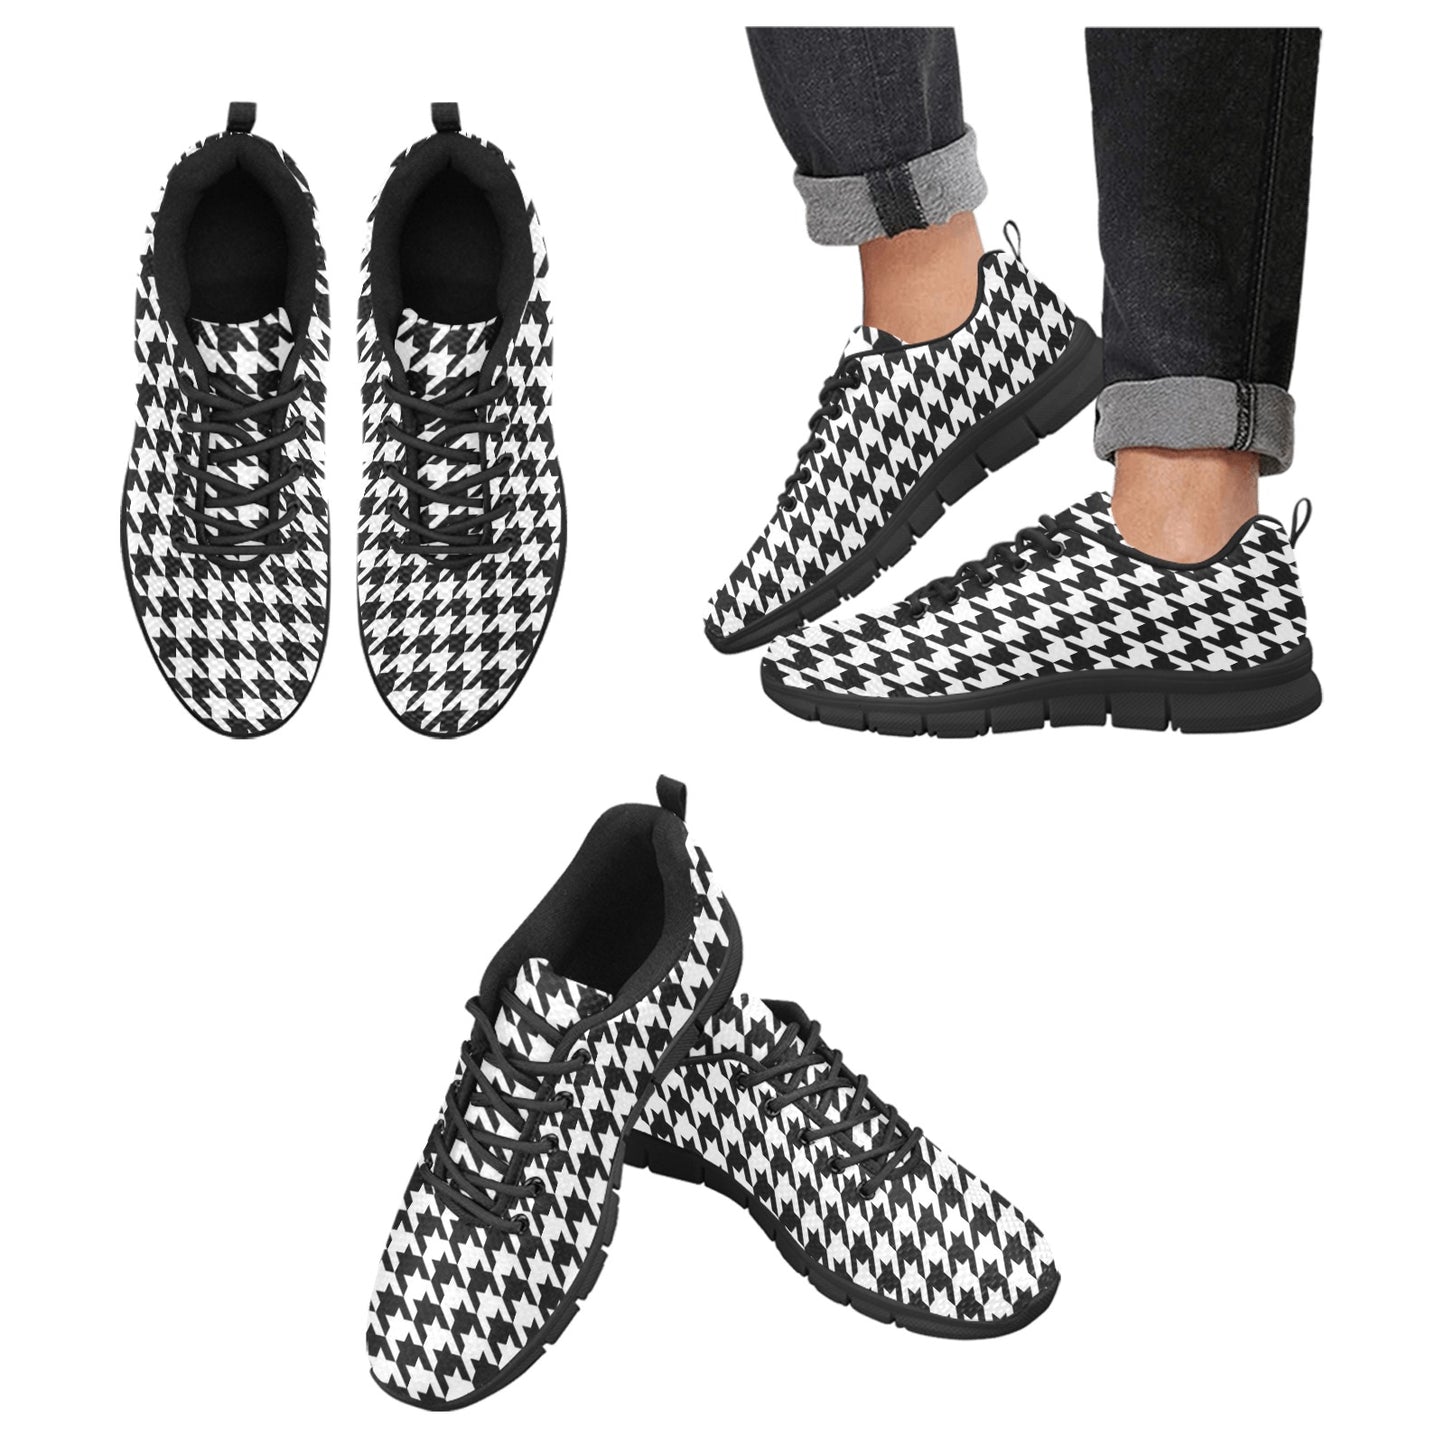 Houndstooth Women Sneakers Shoes, Black White Print Custom Cute Ladies Breathable Running Fashion Vegan Mesh Canvas Athletic Sports